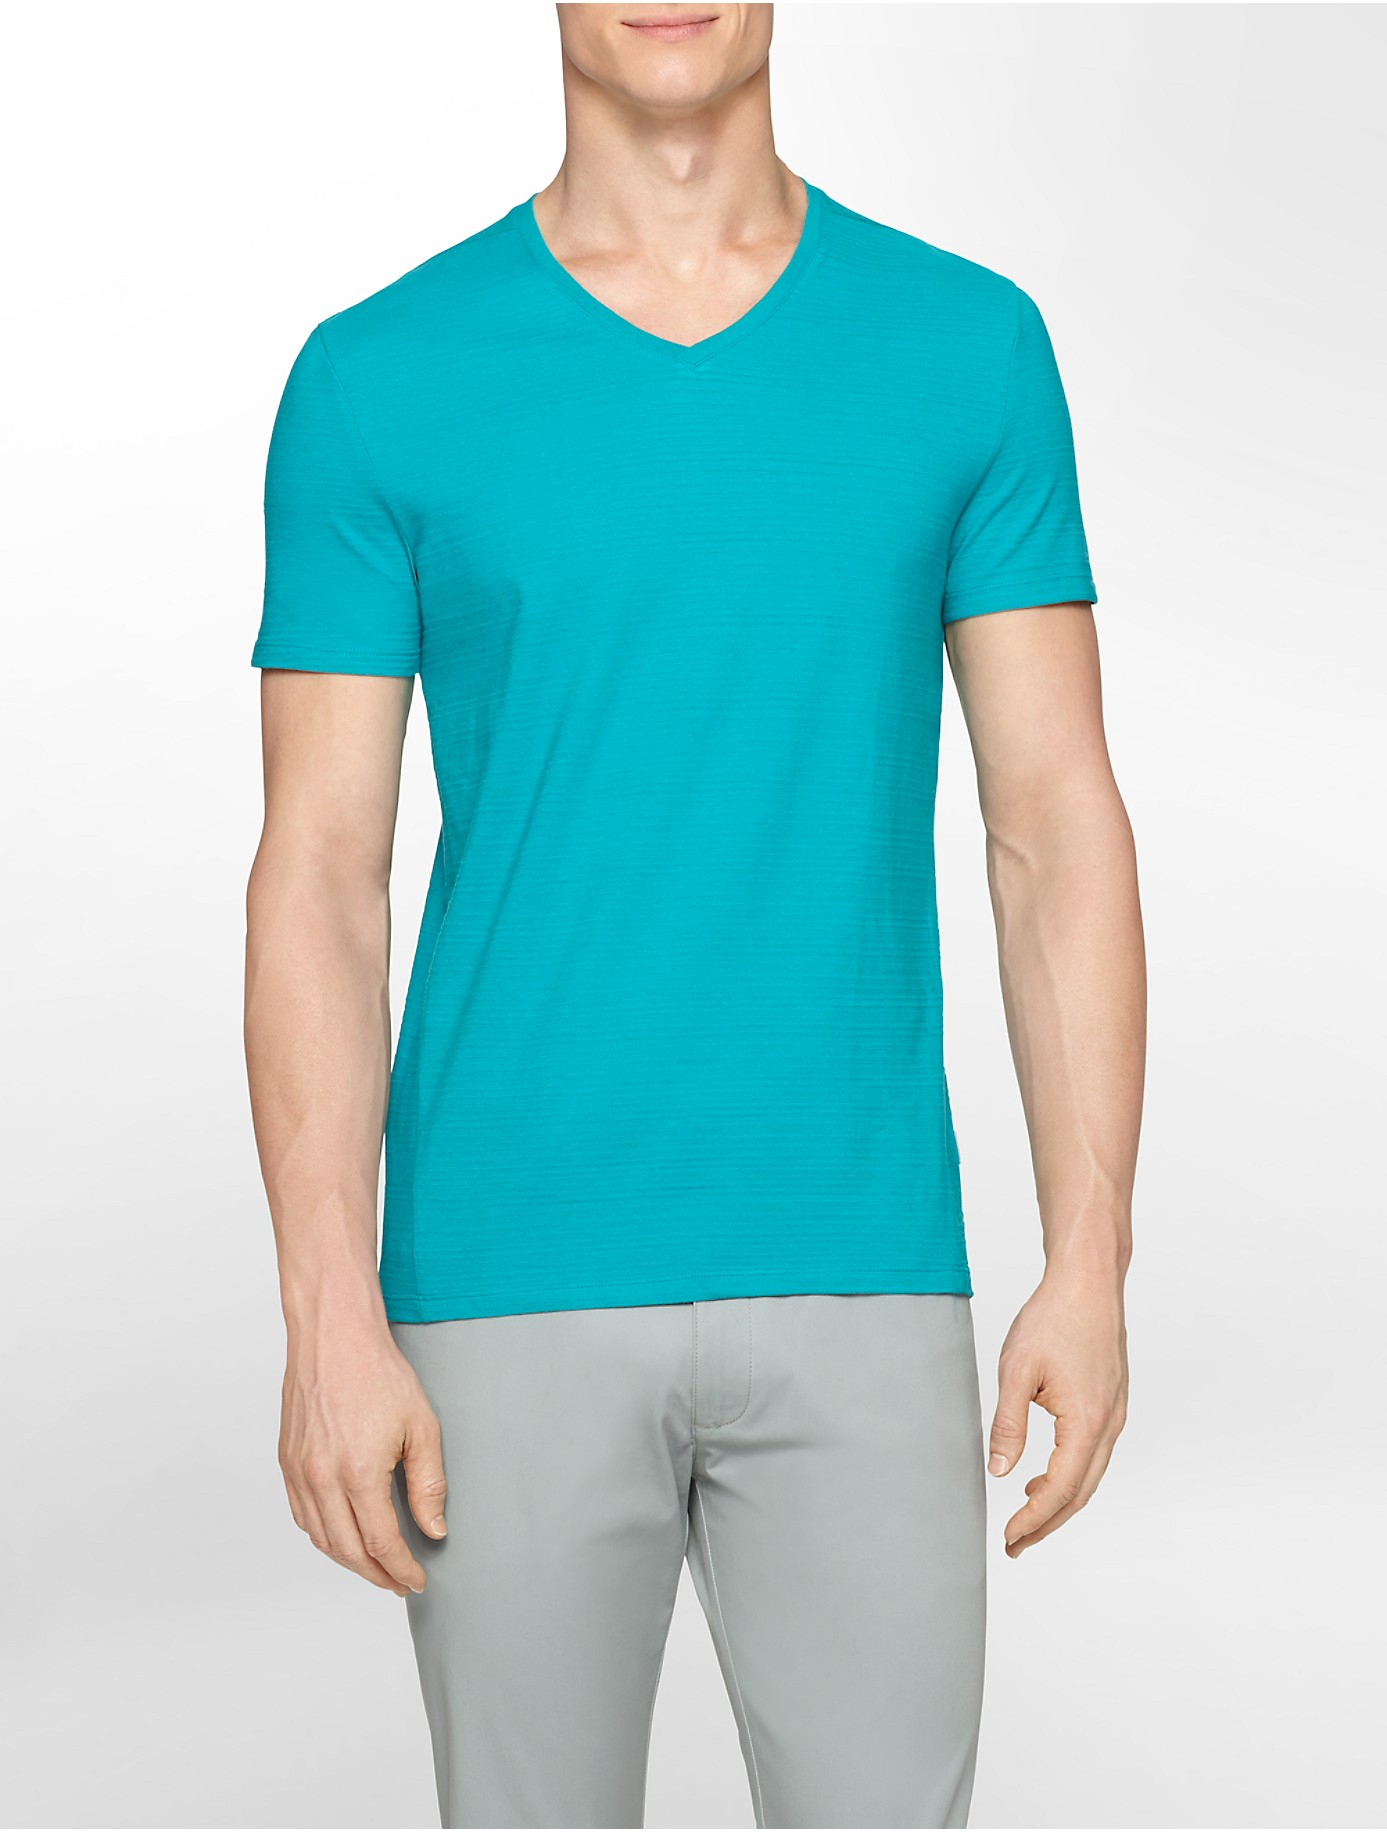 Calvin Klein White Label Slim Fit Heathered V-Neck T-Shirt in Green for ...